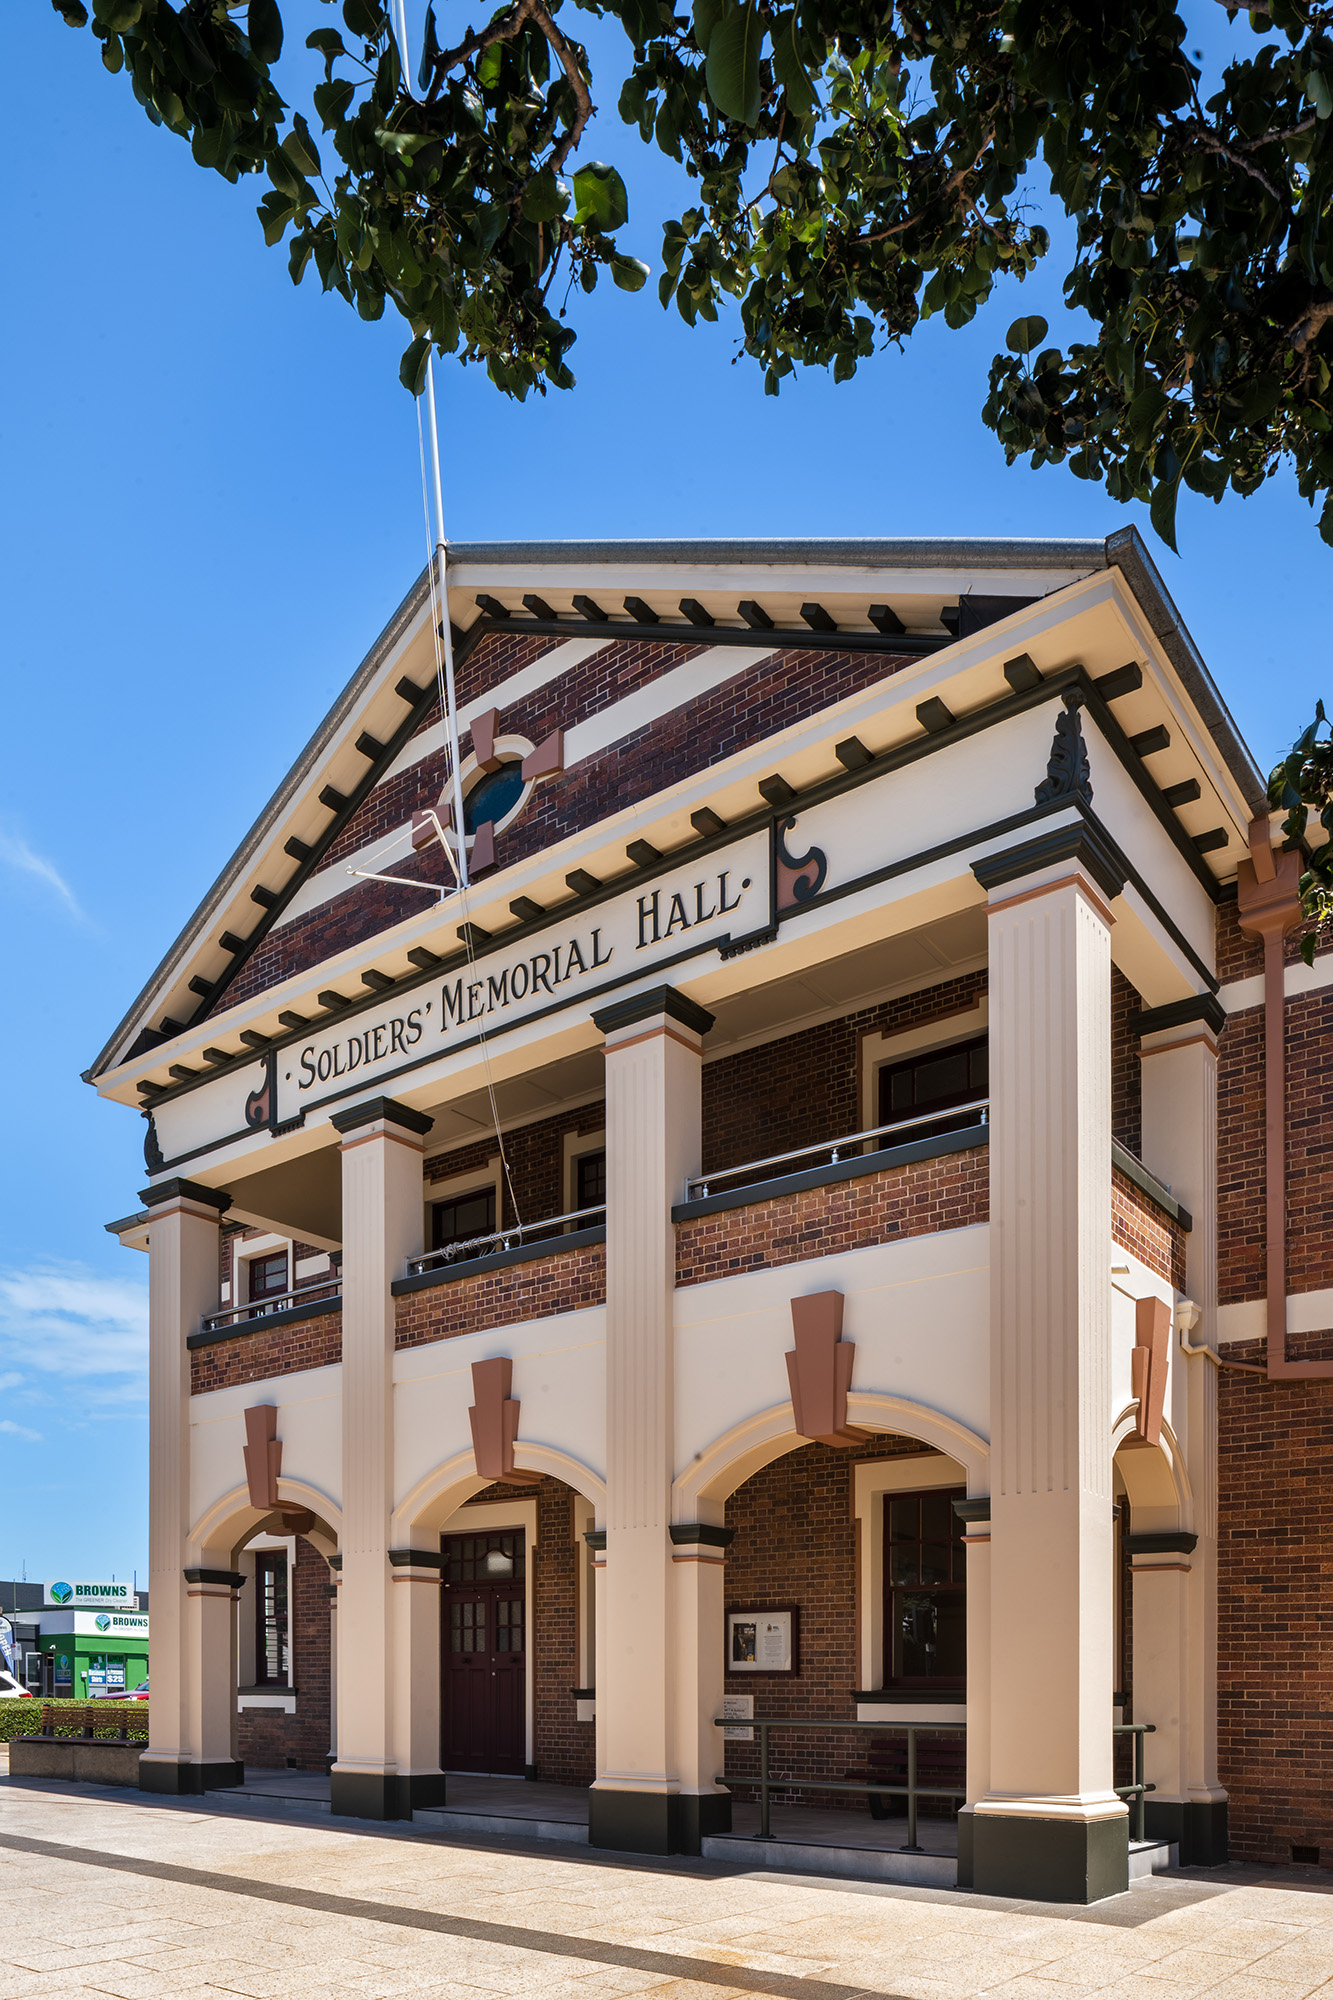 Exterior of the Soldiers Memorial Hall in Toowoomba